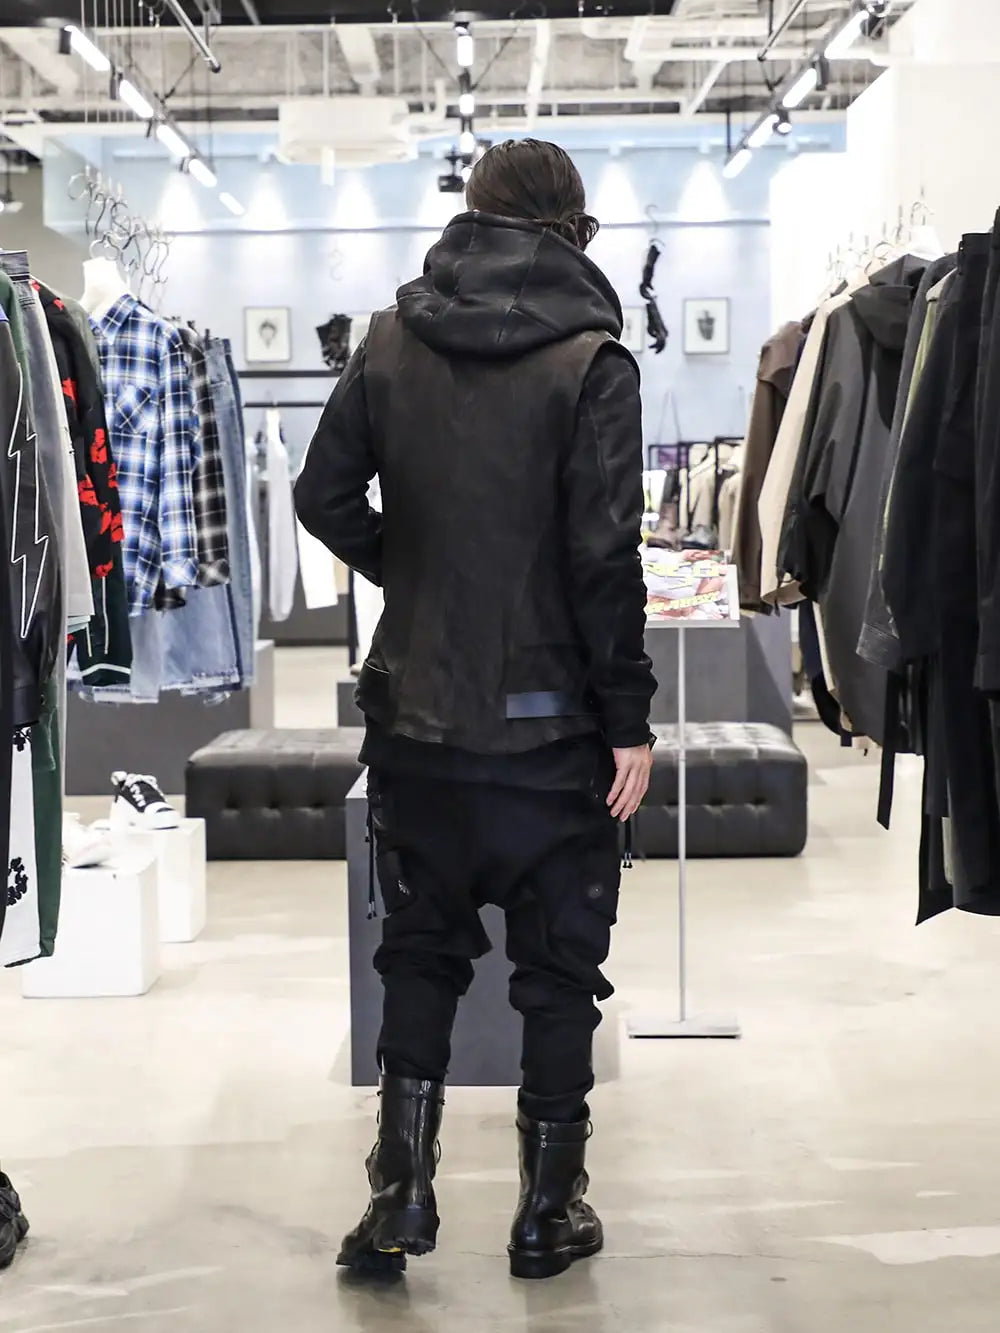 JULIUS 24SS Styling - Leather style with a masculine feel - ST105-0224S Japan Calf Leather Rider's Vest - ST101-0124S Untwisted Fleece-Lined Hooded Jacket - 859PAM3-BK-Black 10.5oz Stretch Denim Gas Mask Skinny Pants - 859FWM1-Black Cow Skin Long Fireman Boots 1-004